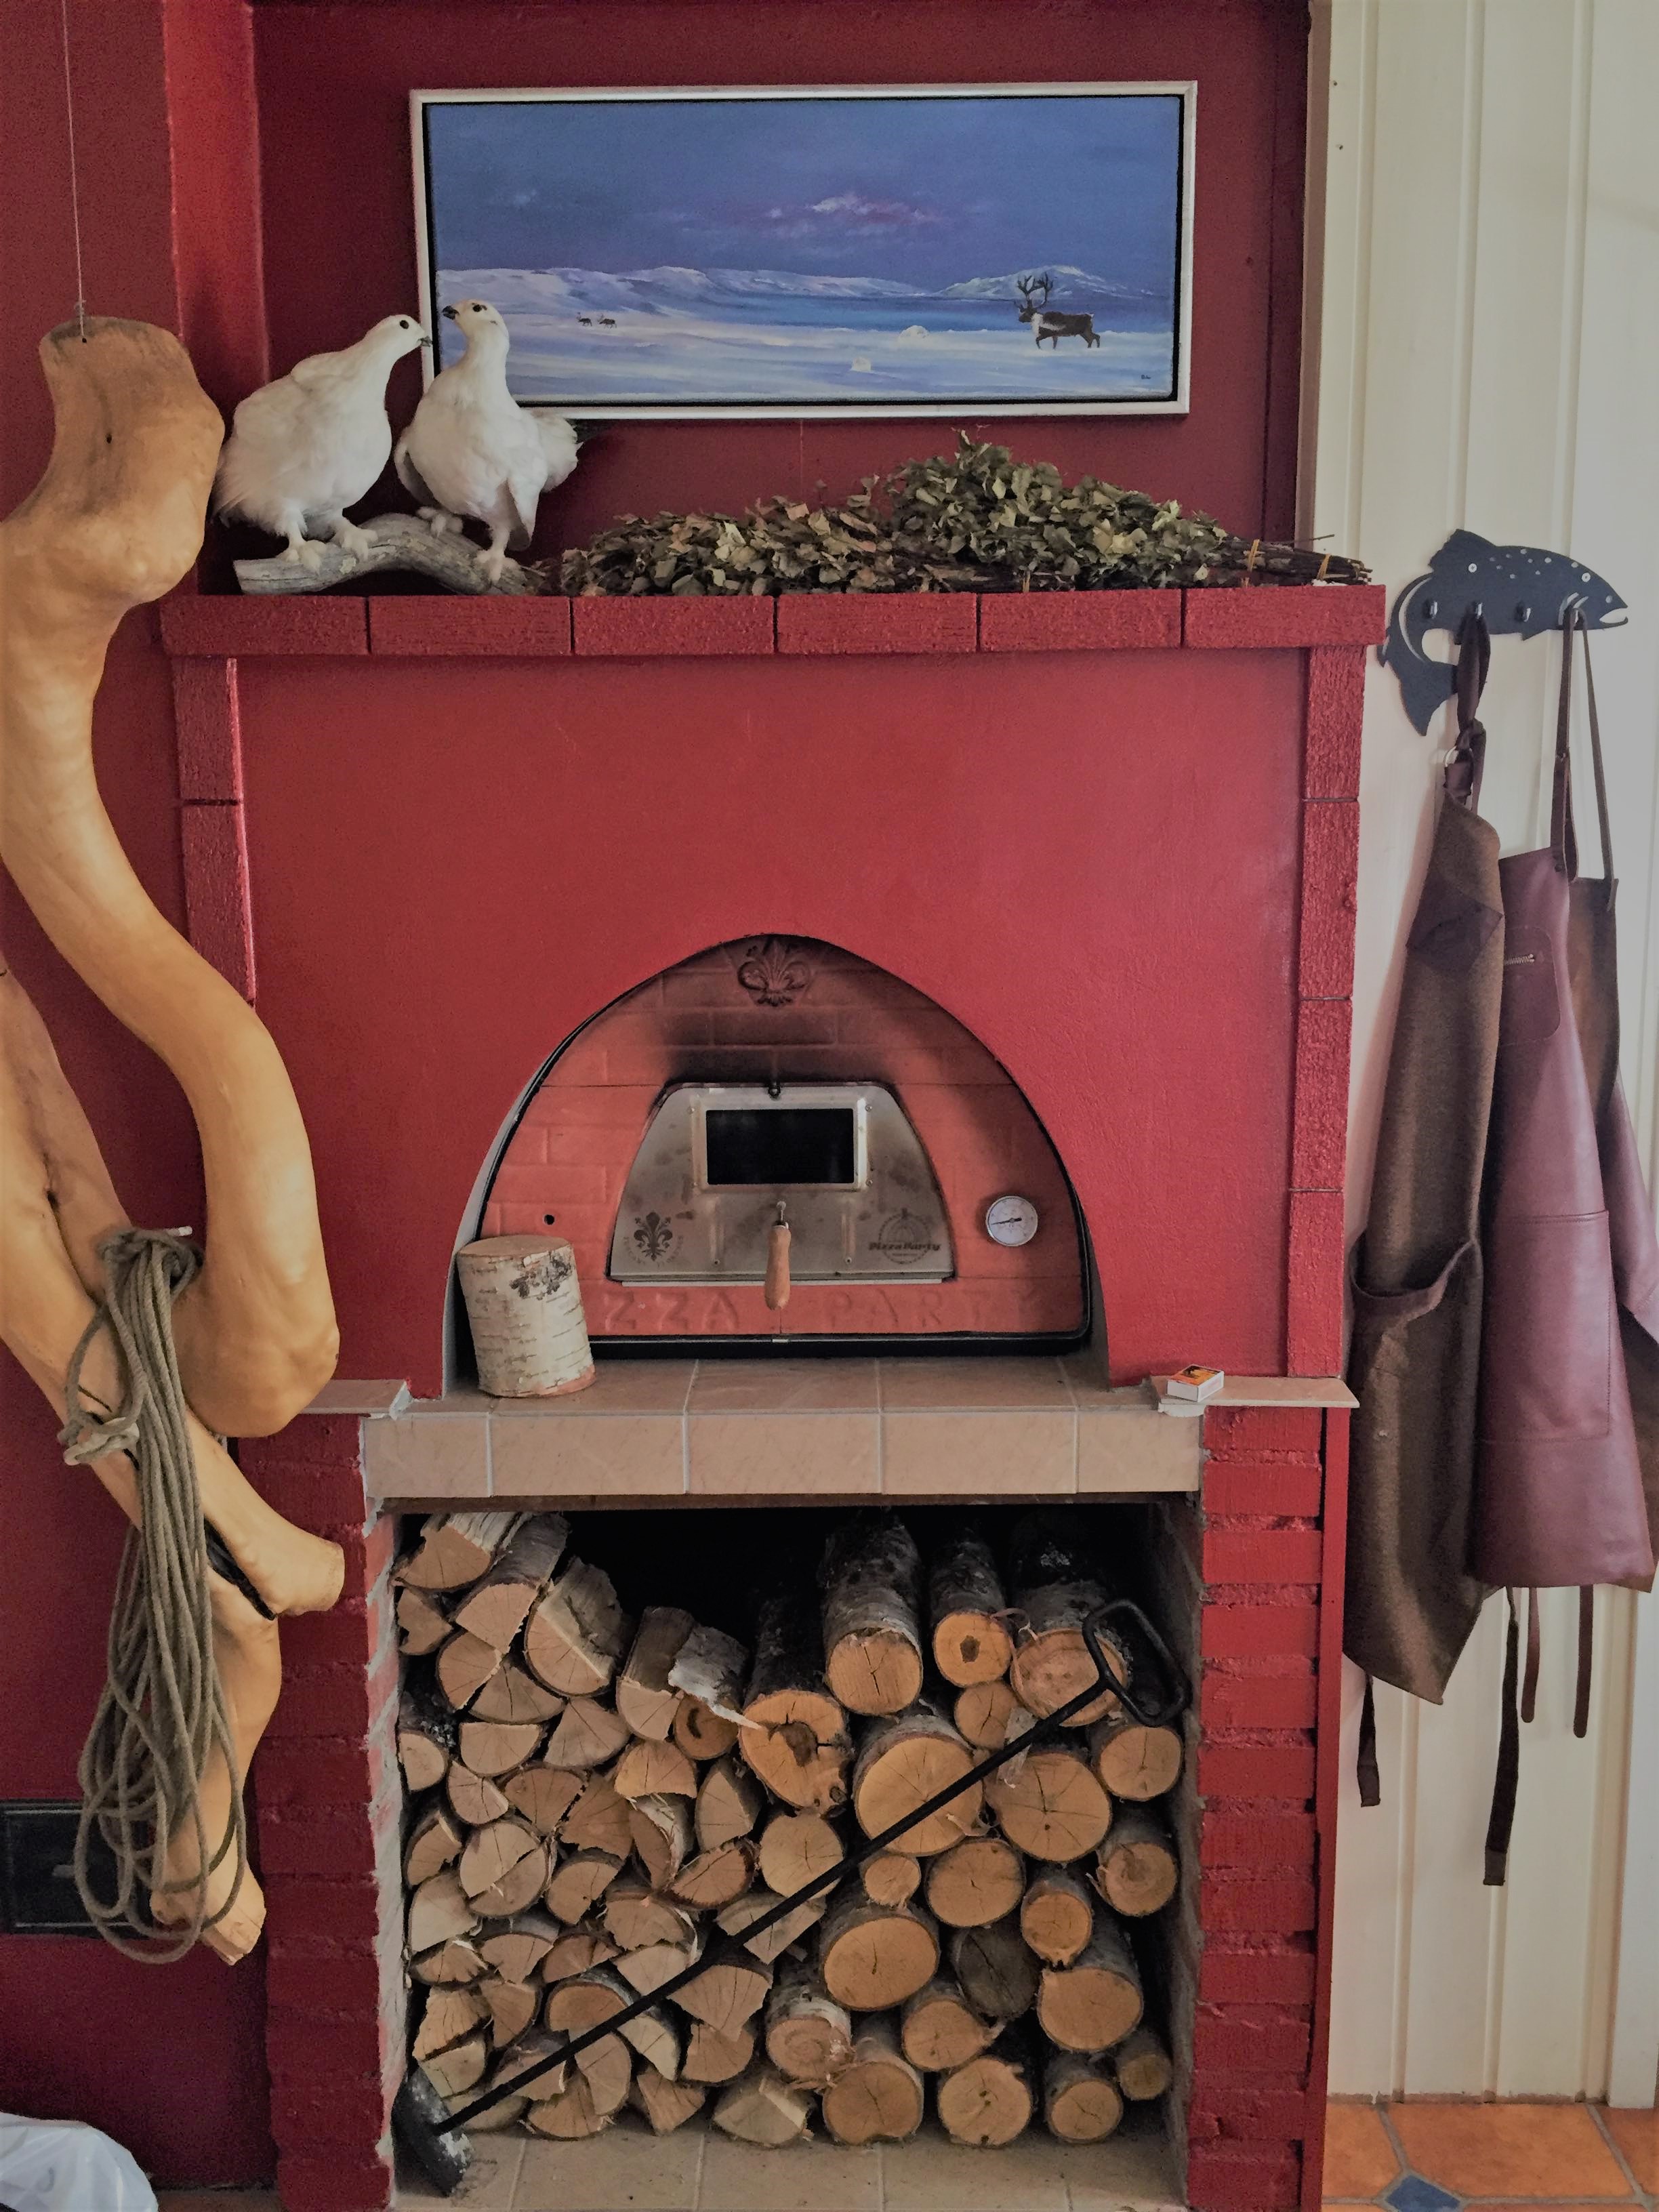 Wood oven for food